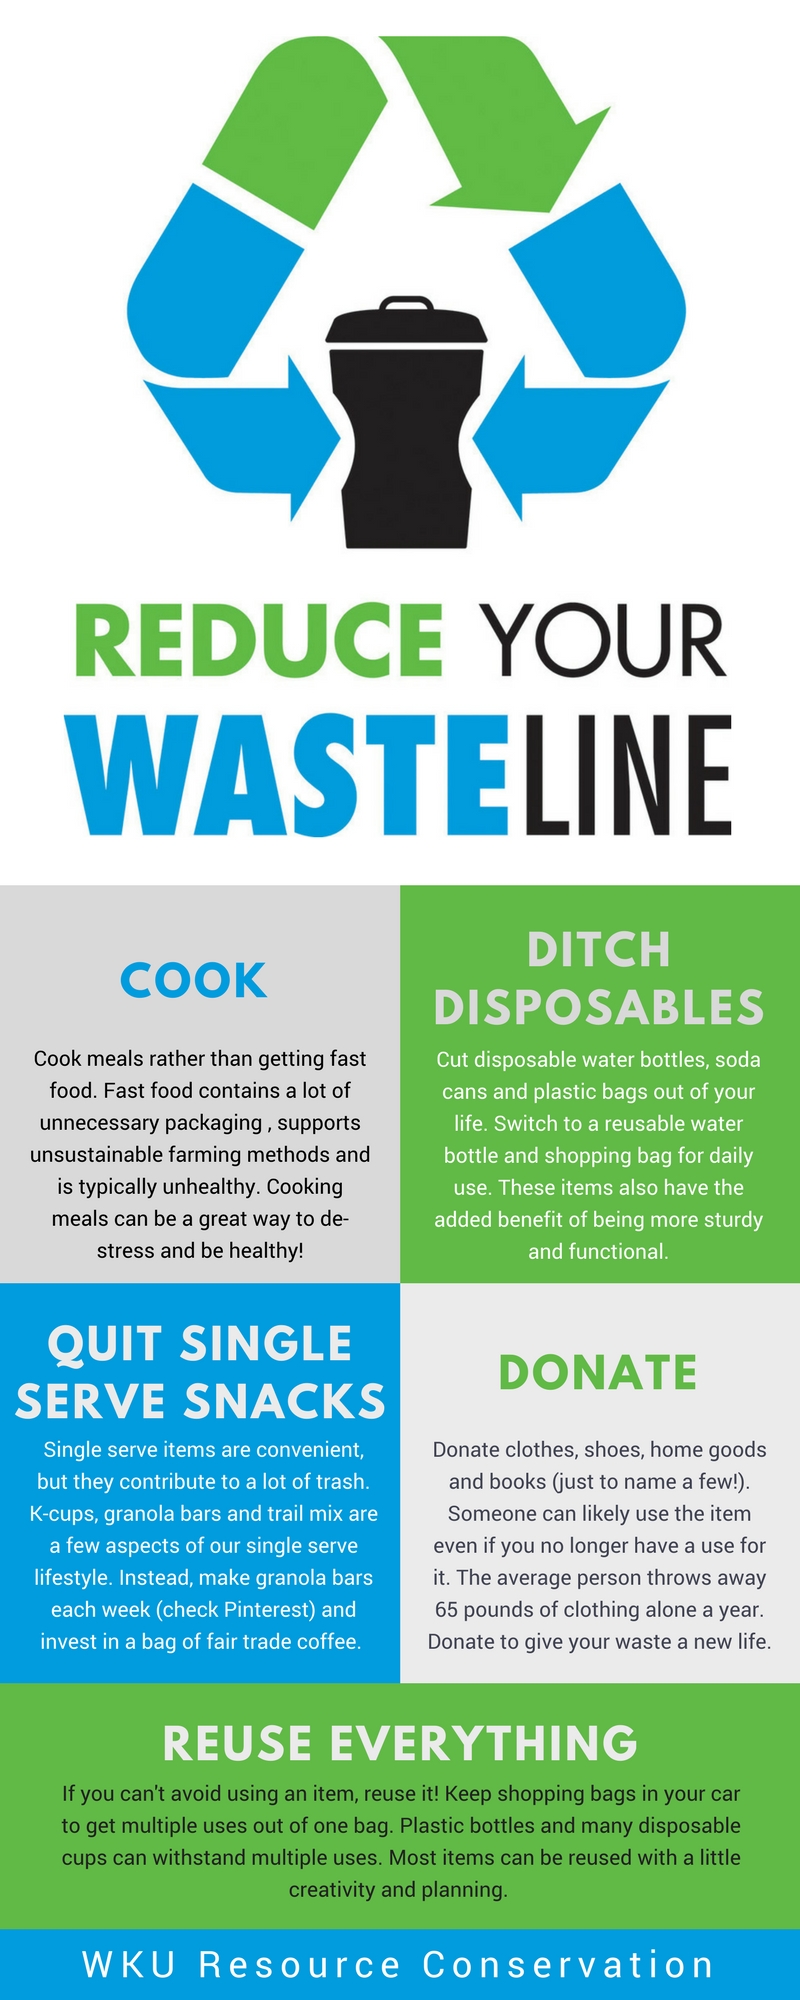 Reduce your Waste Line